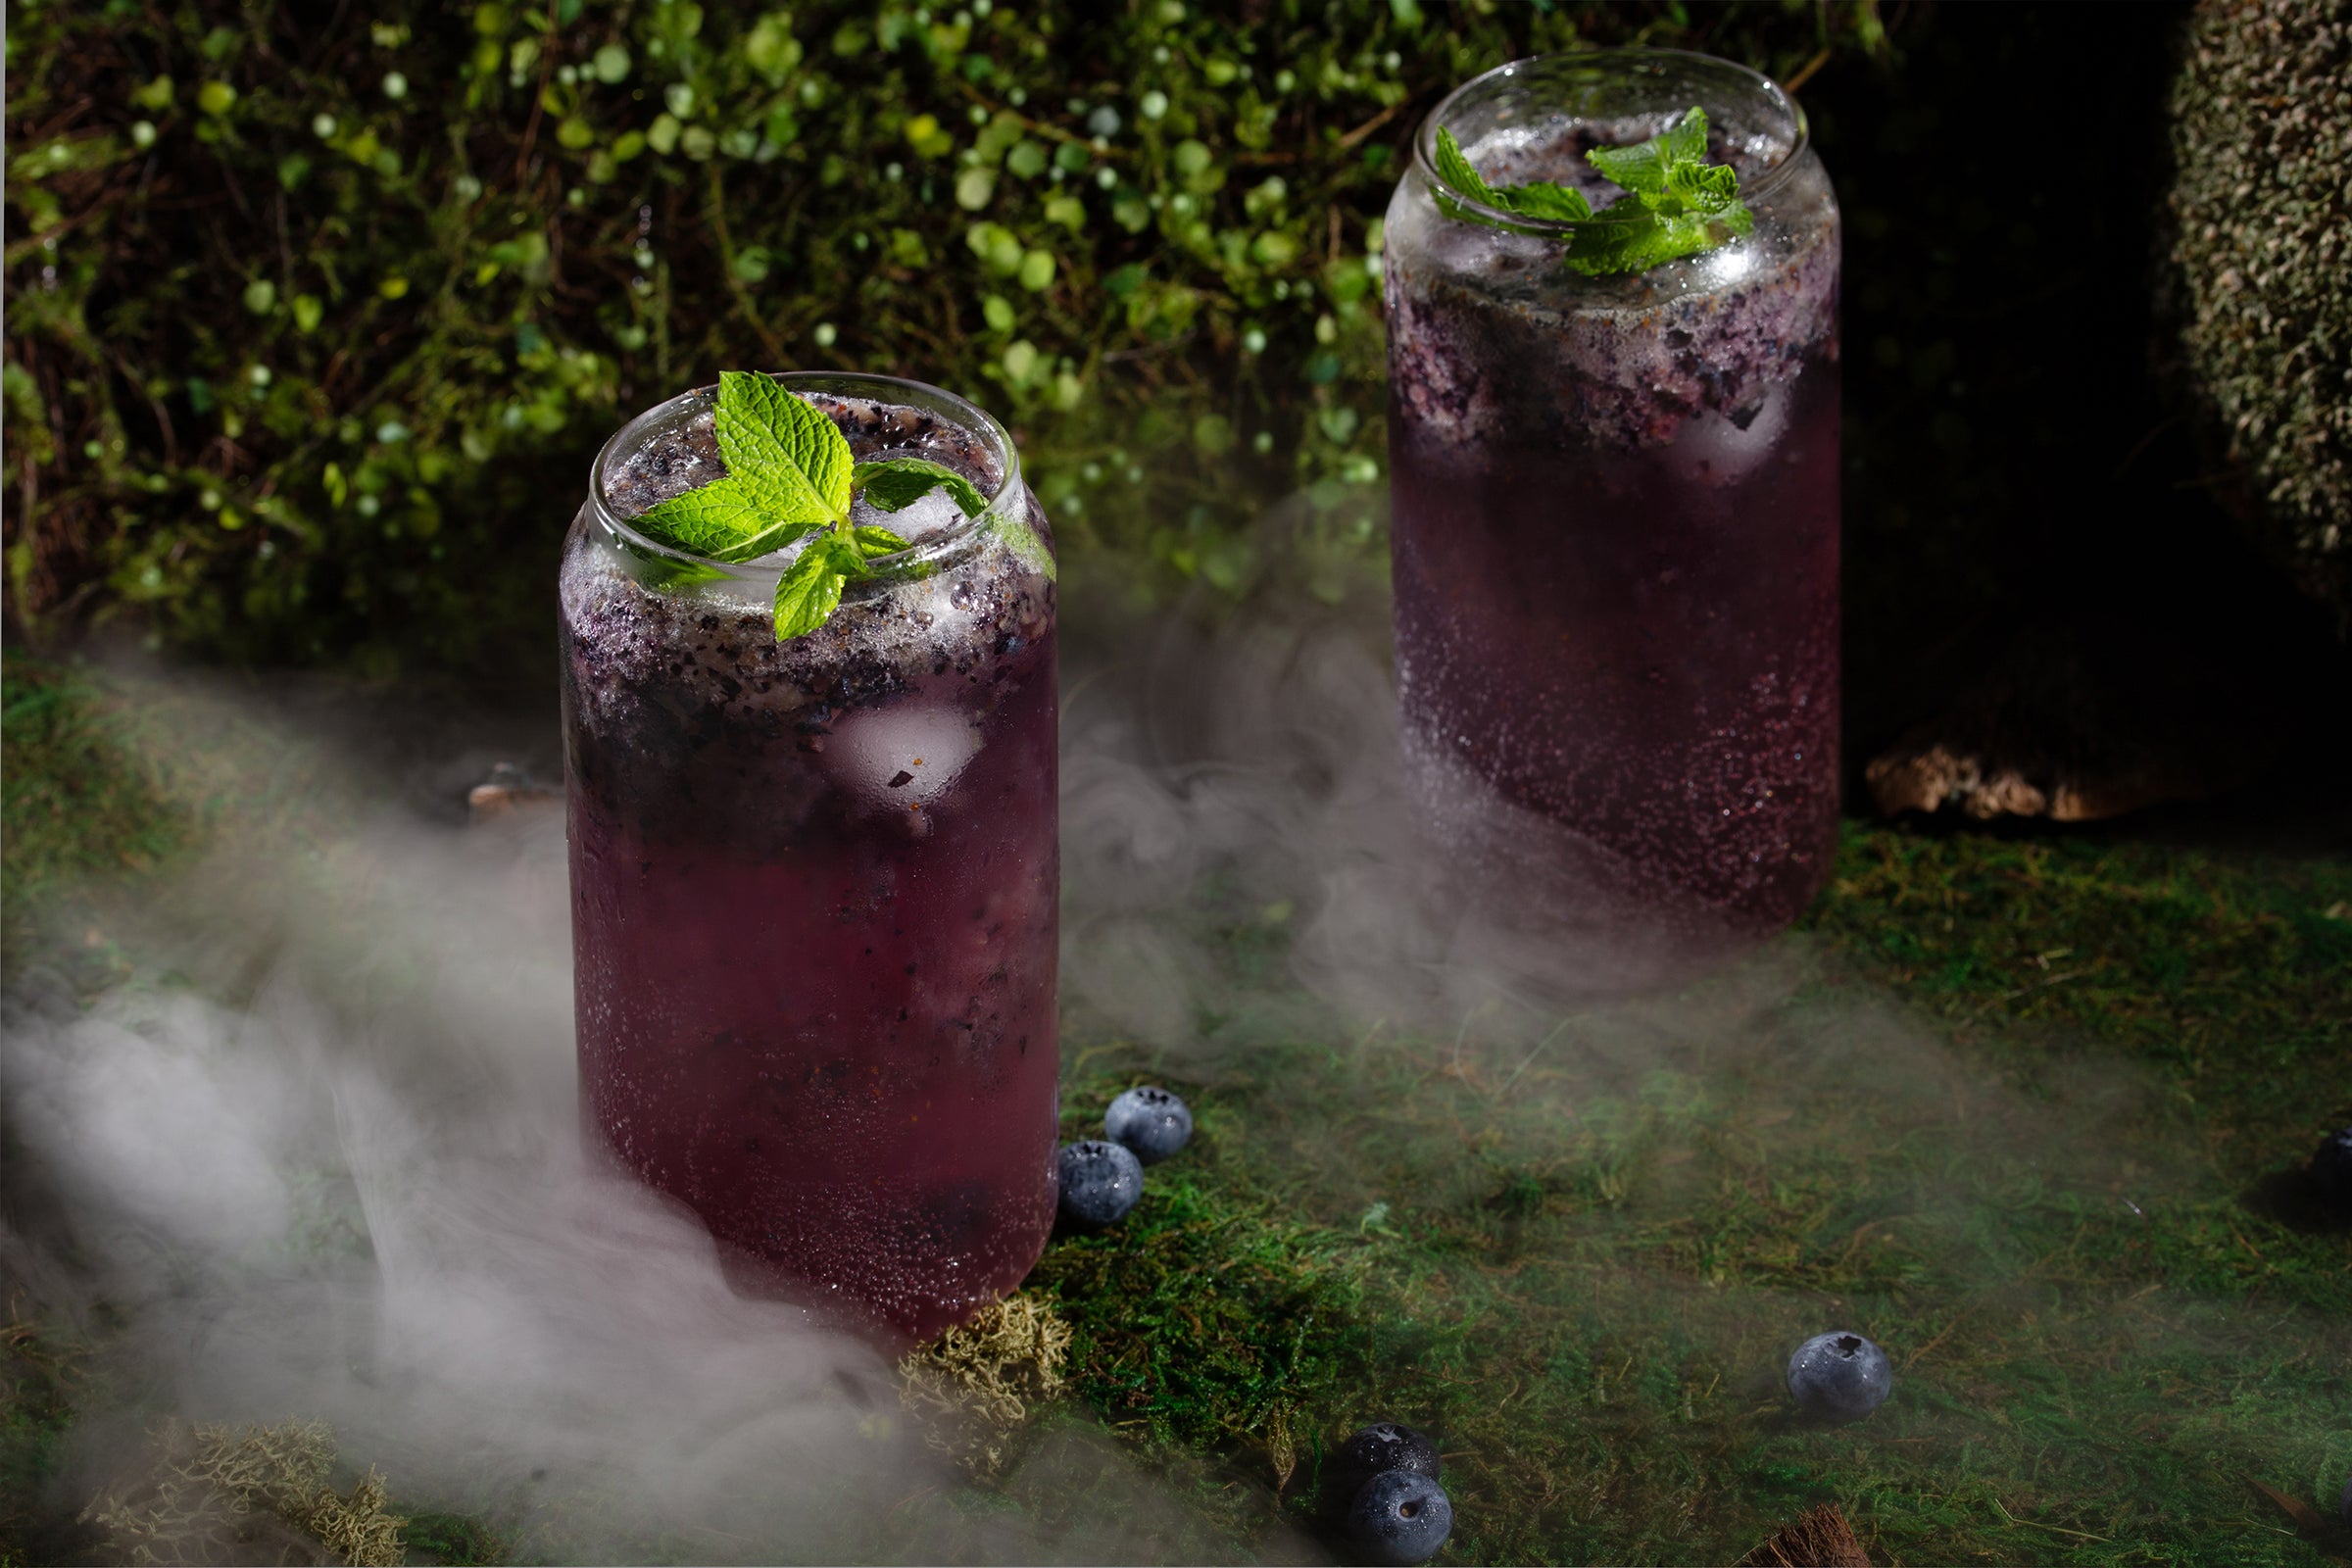 Blue and purple cocktail with mint garnish and blueberries on a misty and mossy forest floor.